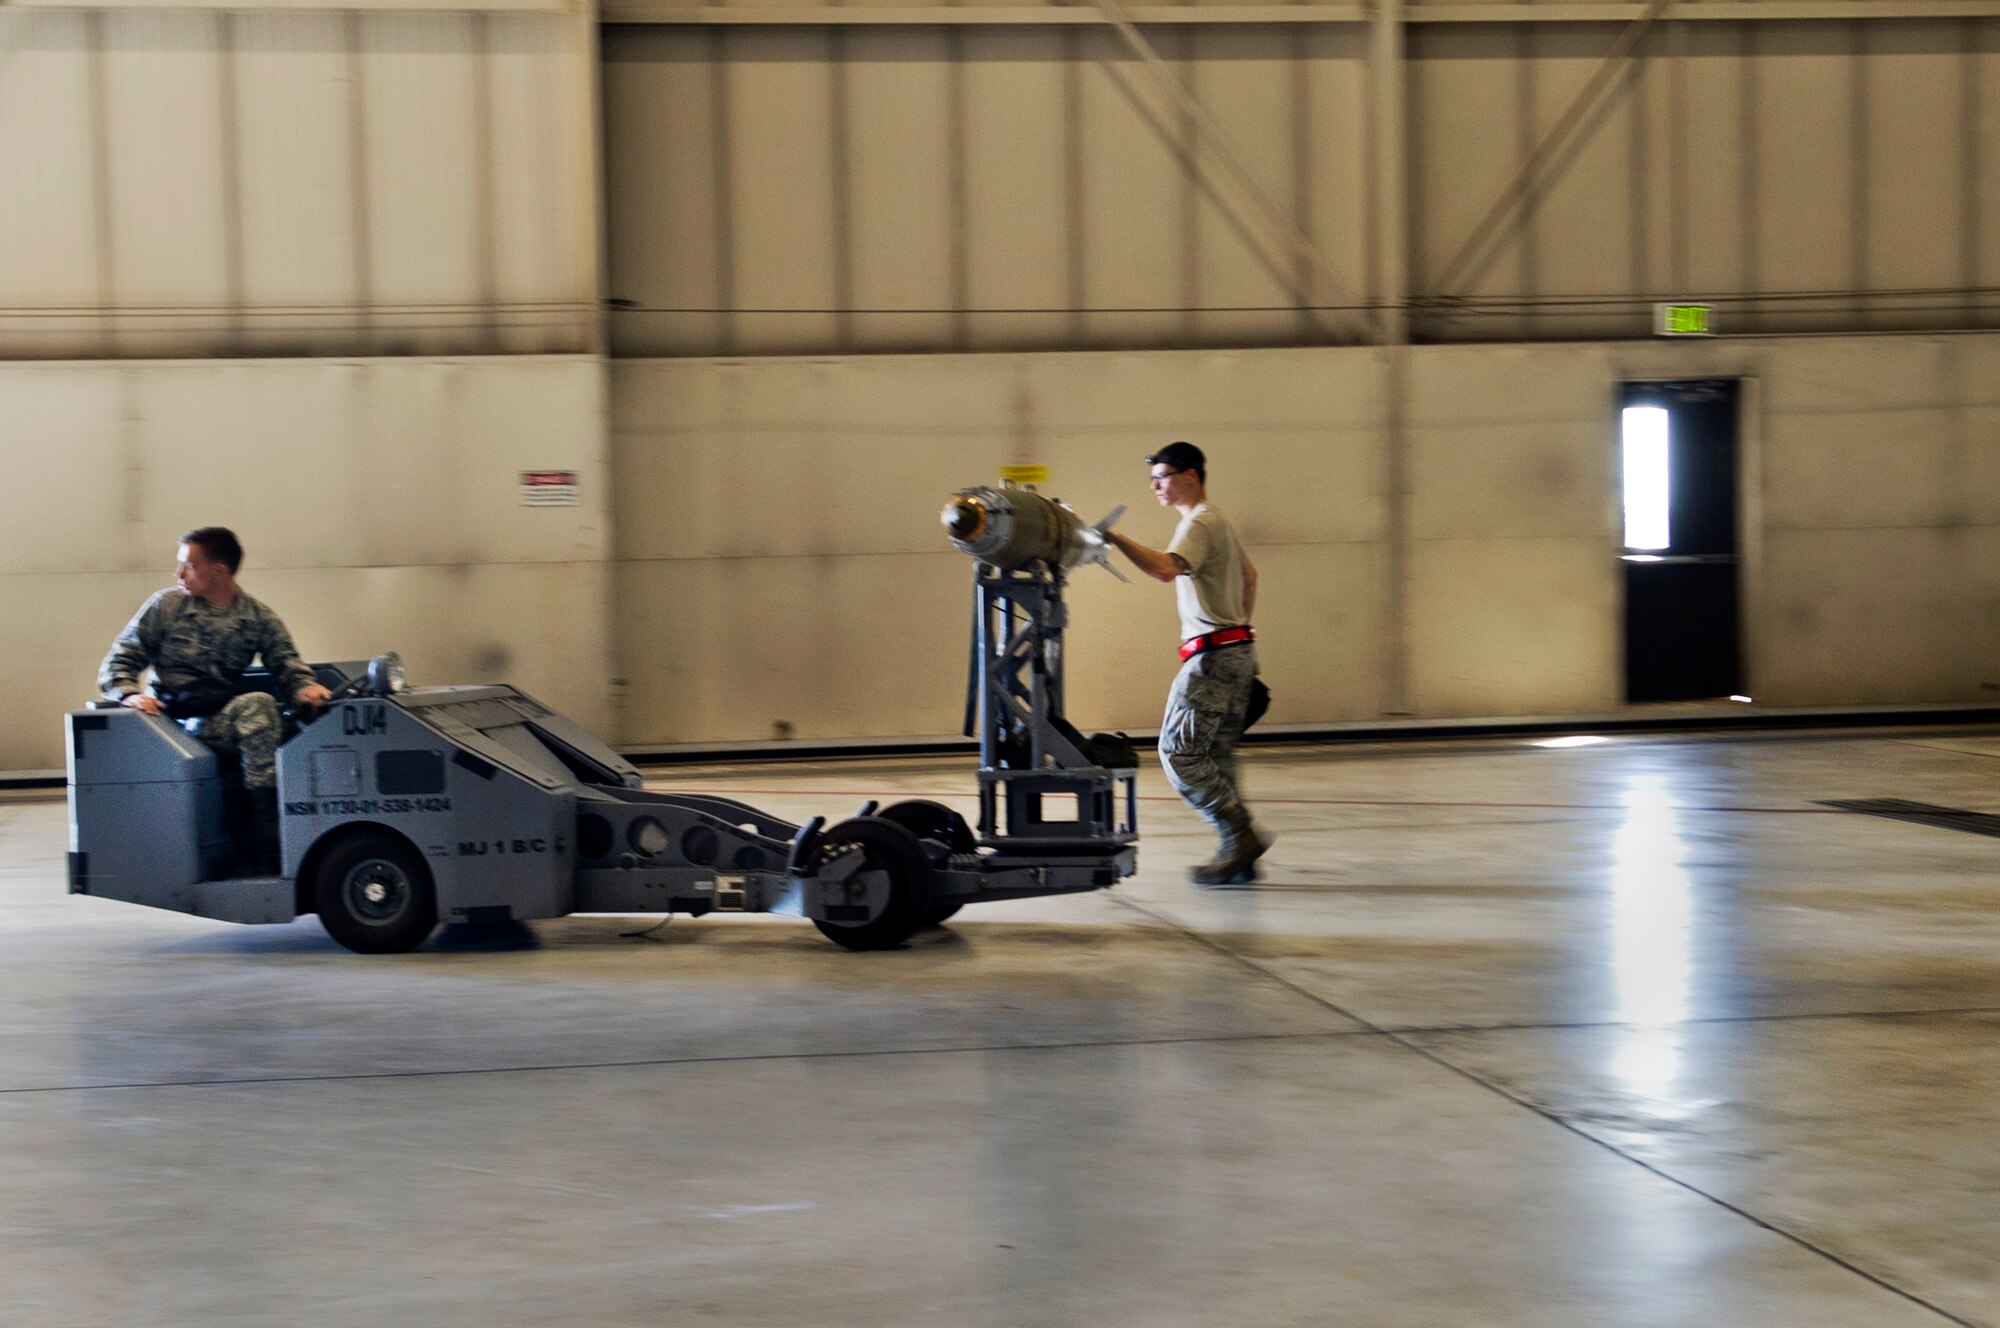 Senior Airman Andrew Grimes, 5th Aircraft Maintenance Squadron weapons load crew member, guides a joint direct attack GBU-38 munition while Airman 1st Class Michael Page, 5th AMXS weapons load crew member, drives a  MJ-1 Jammer on Minot Air Force Base, N.D., Sept. 5, 2014. The load crew is evaluated on how quickly they load munitions onto a B-52H Stratofortress and how many discrepancies are found.  (U.S. Air Force photo/Senior Airman Brittany Y. Bateman)